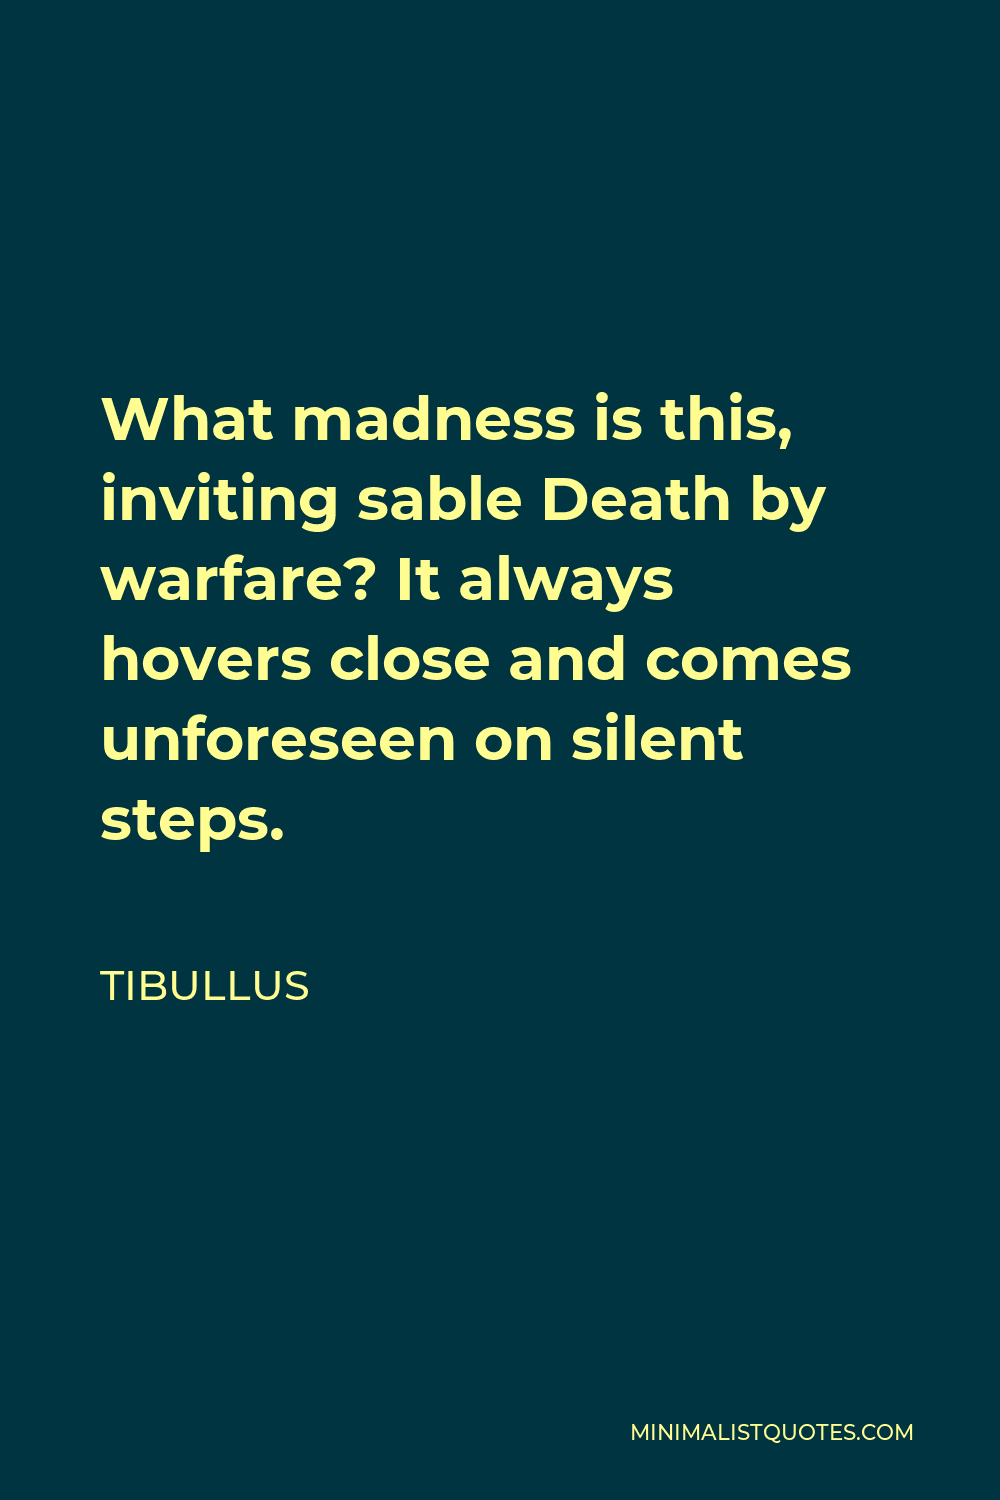 Tibullus Quote - What madness is this, inviting sable Death by warfare? It always hovers close and comes unforeseen on silent steps.